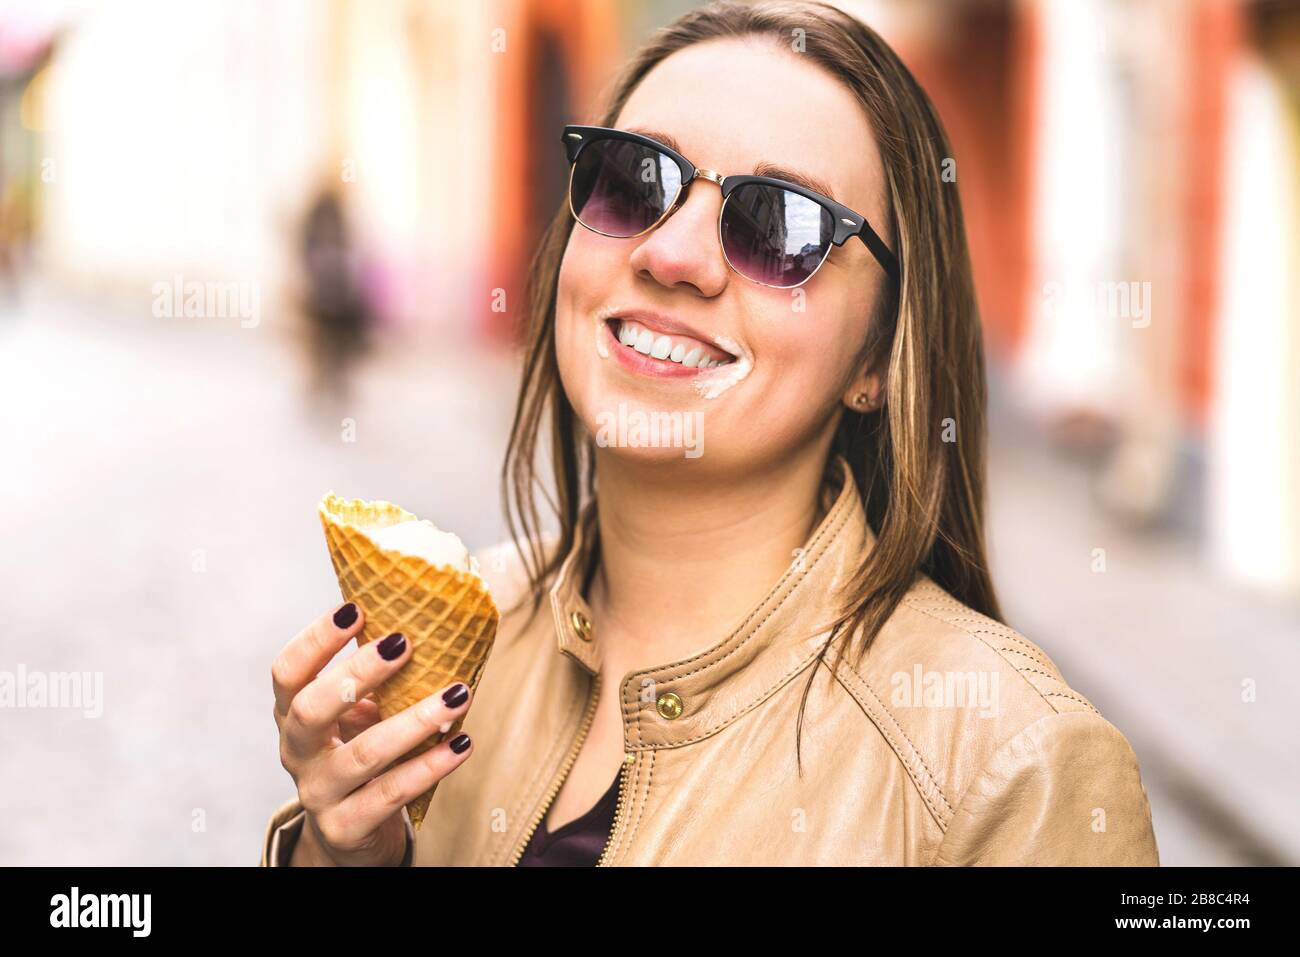 Ice cream on messy face. Happy laughing woman eating melting and dripping ice cream in the city. Stock Photo